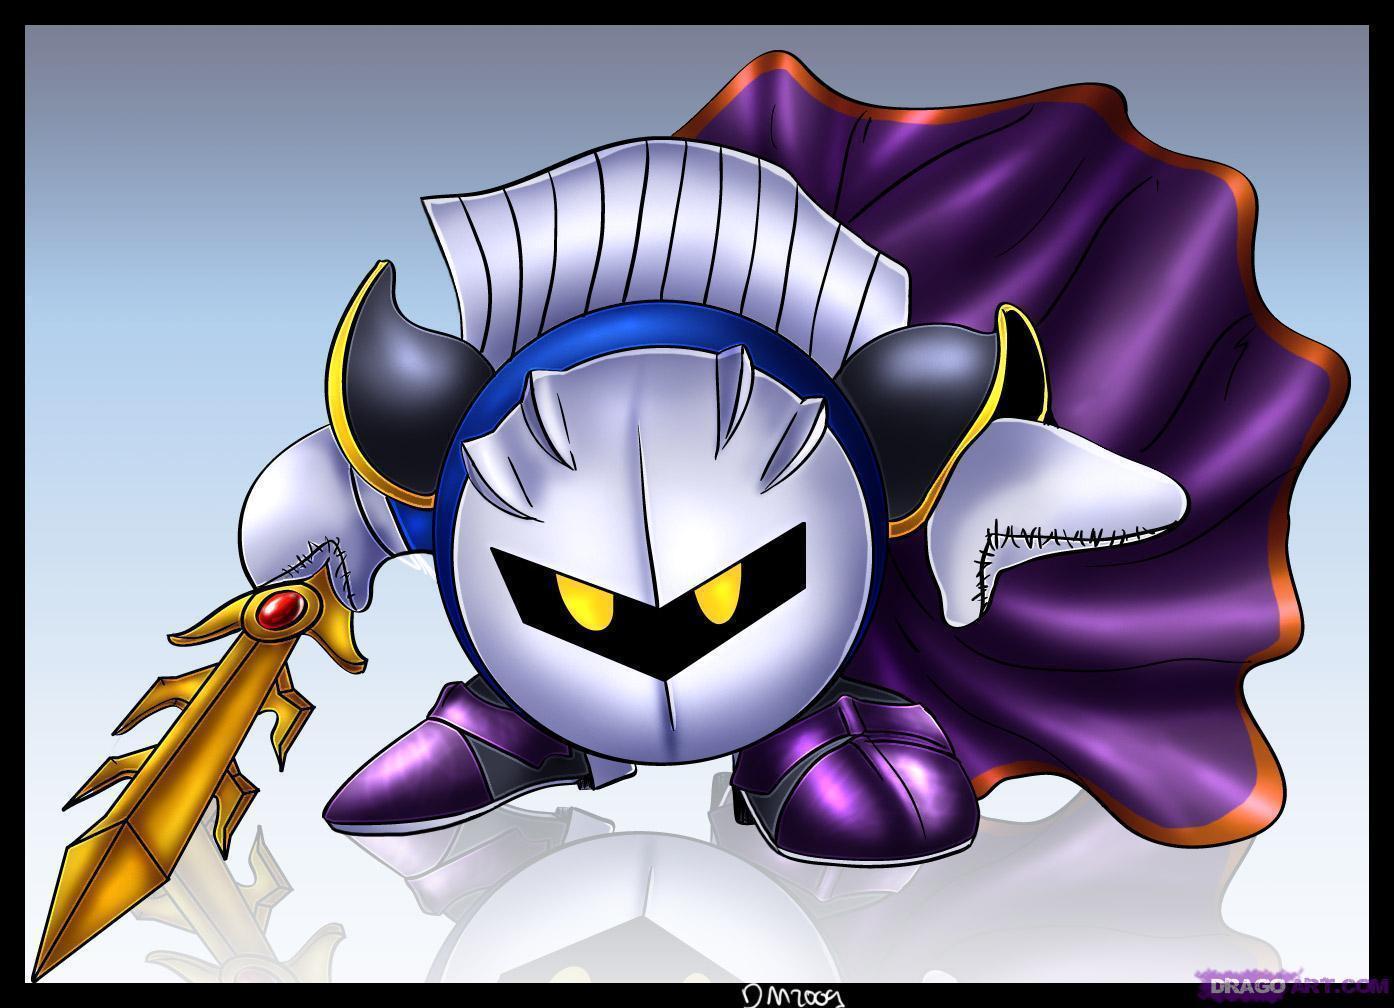 Meta Knight image Meta Knight HD wallpapers and backgrounds photos.